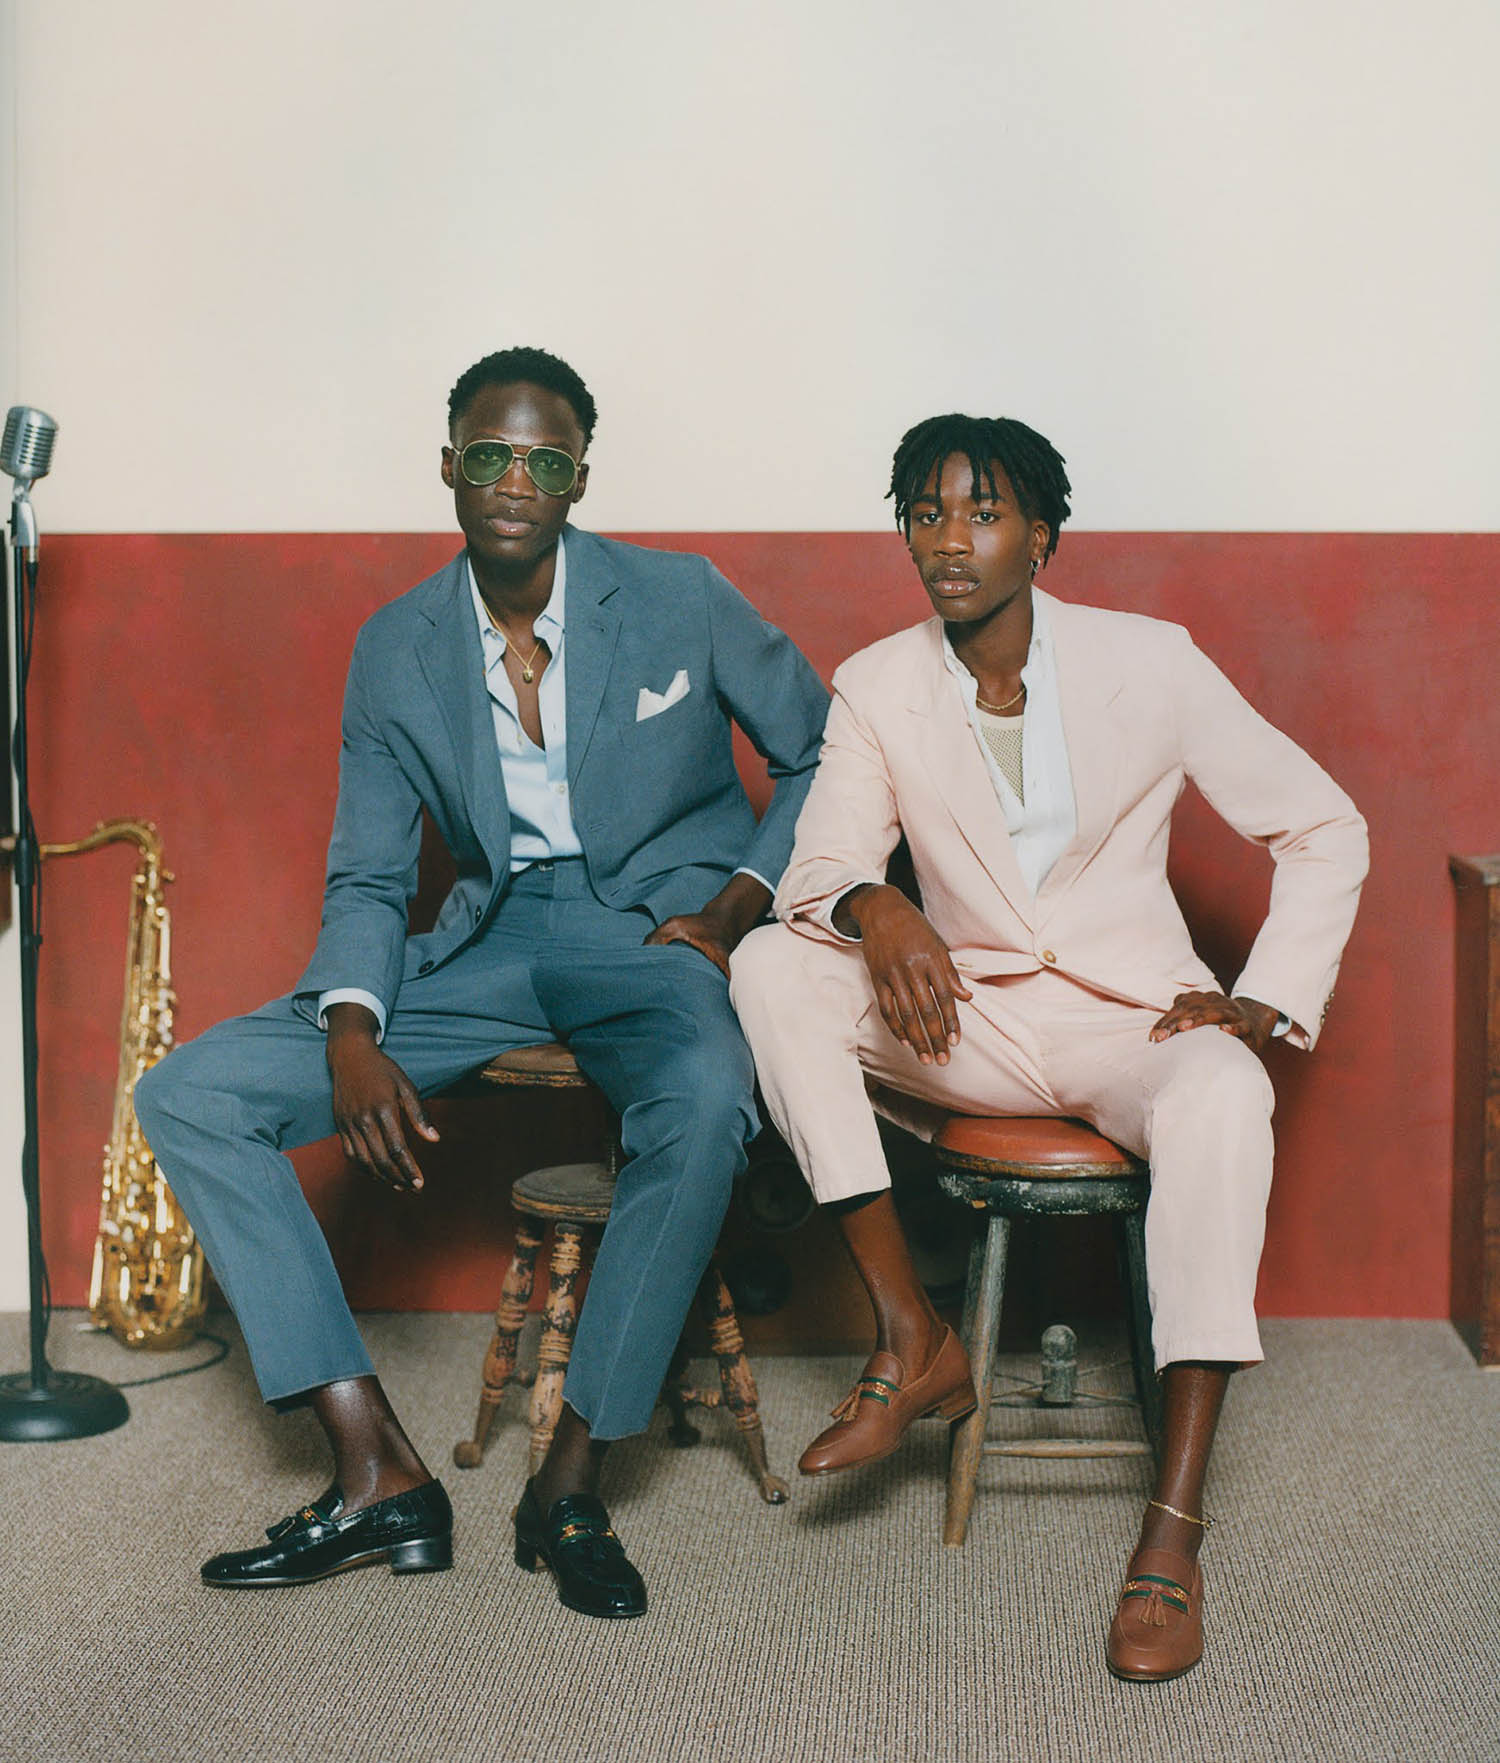 Cheikh Tall and Cloud Modi by Philip-Daniel Ducasse for WSJ. Magazine Spring 2021 Men’s Style